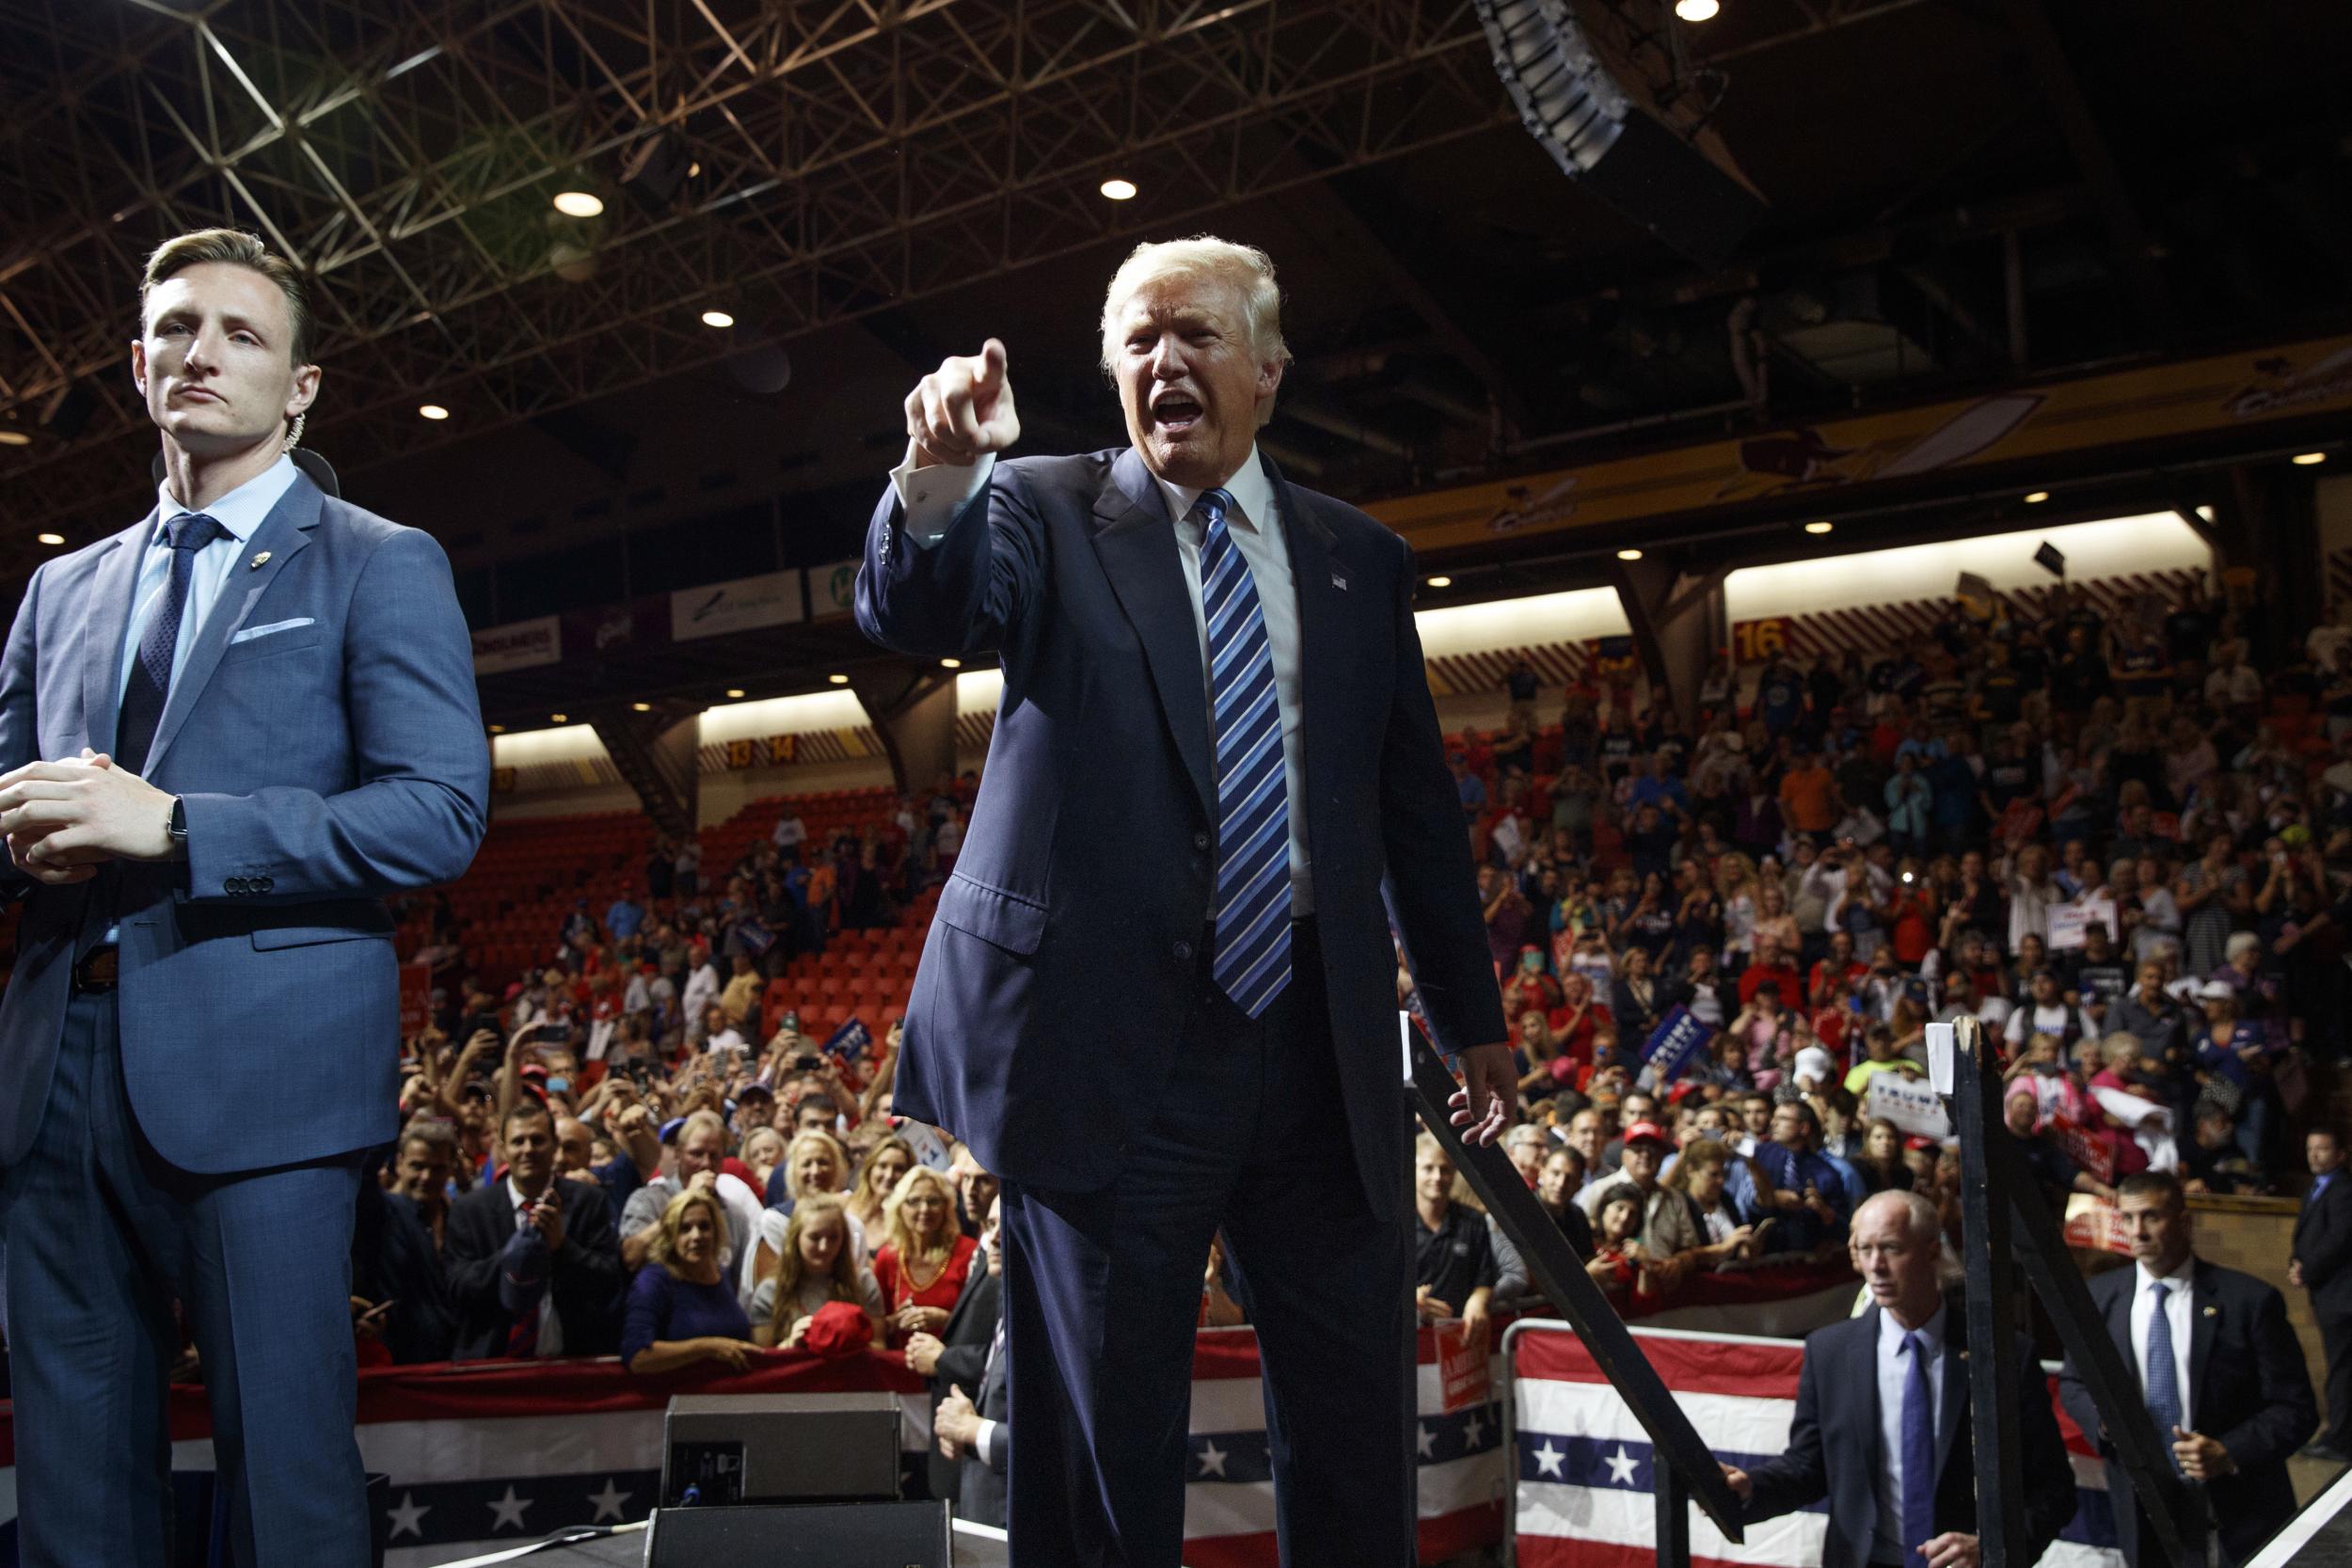 Republican presidential candidate Donald Trump points to the crowd during a rally